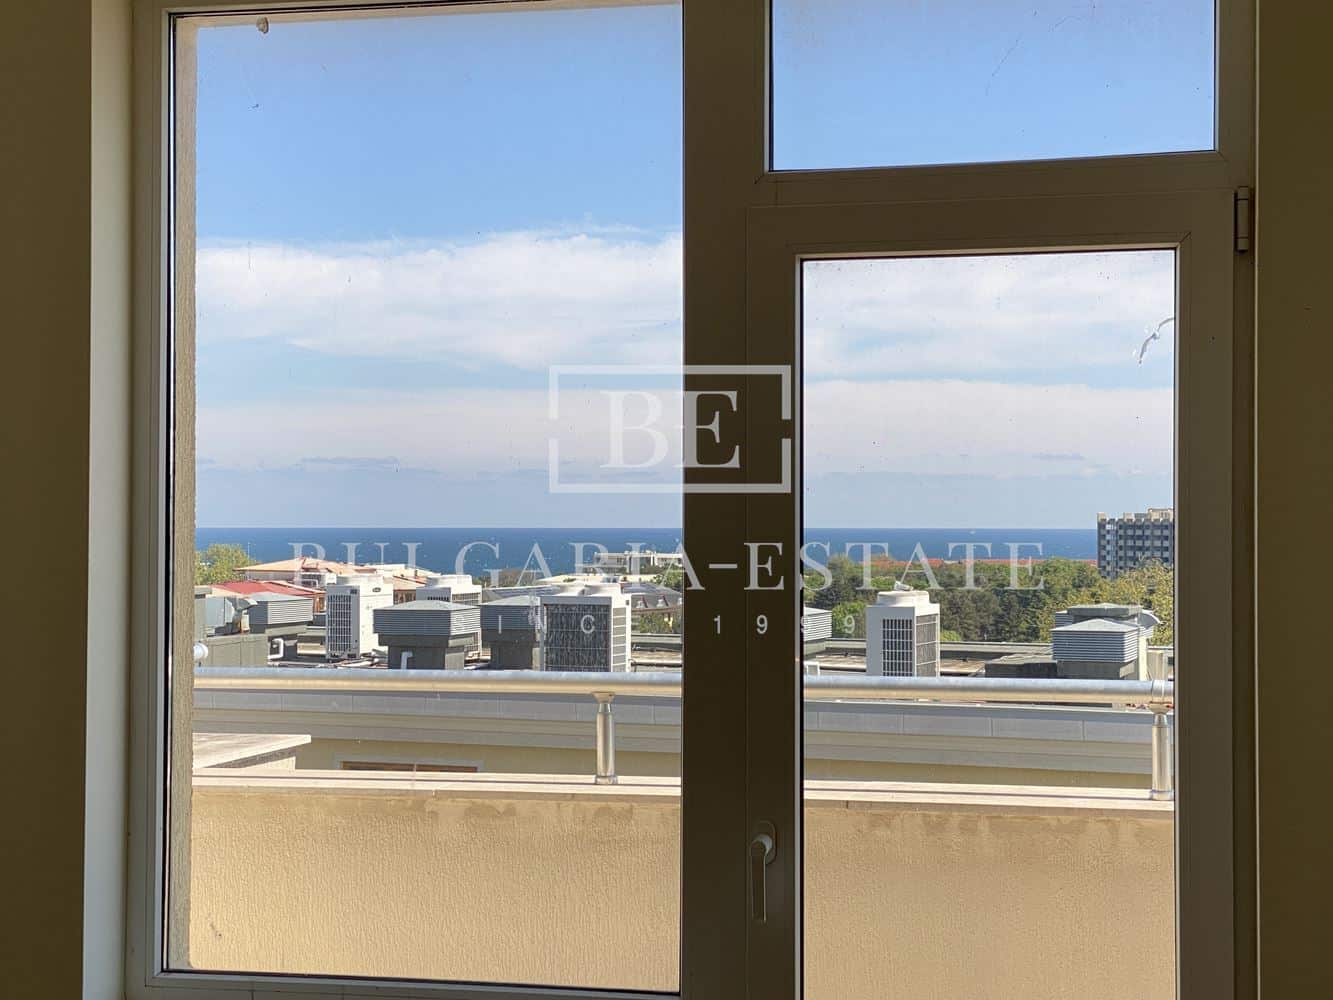 Two bedroom apartment with sea view - St. Constantine and Helena - 0